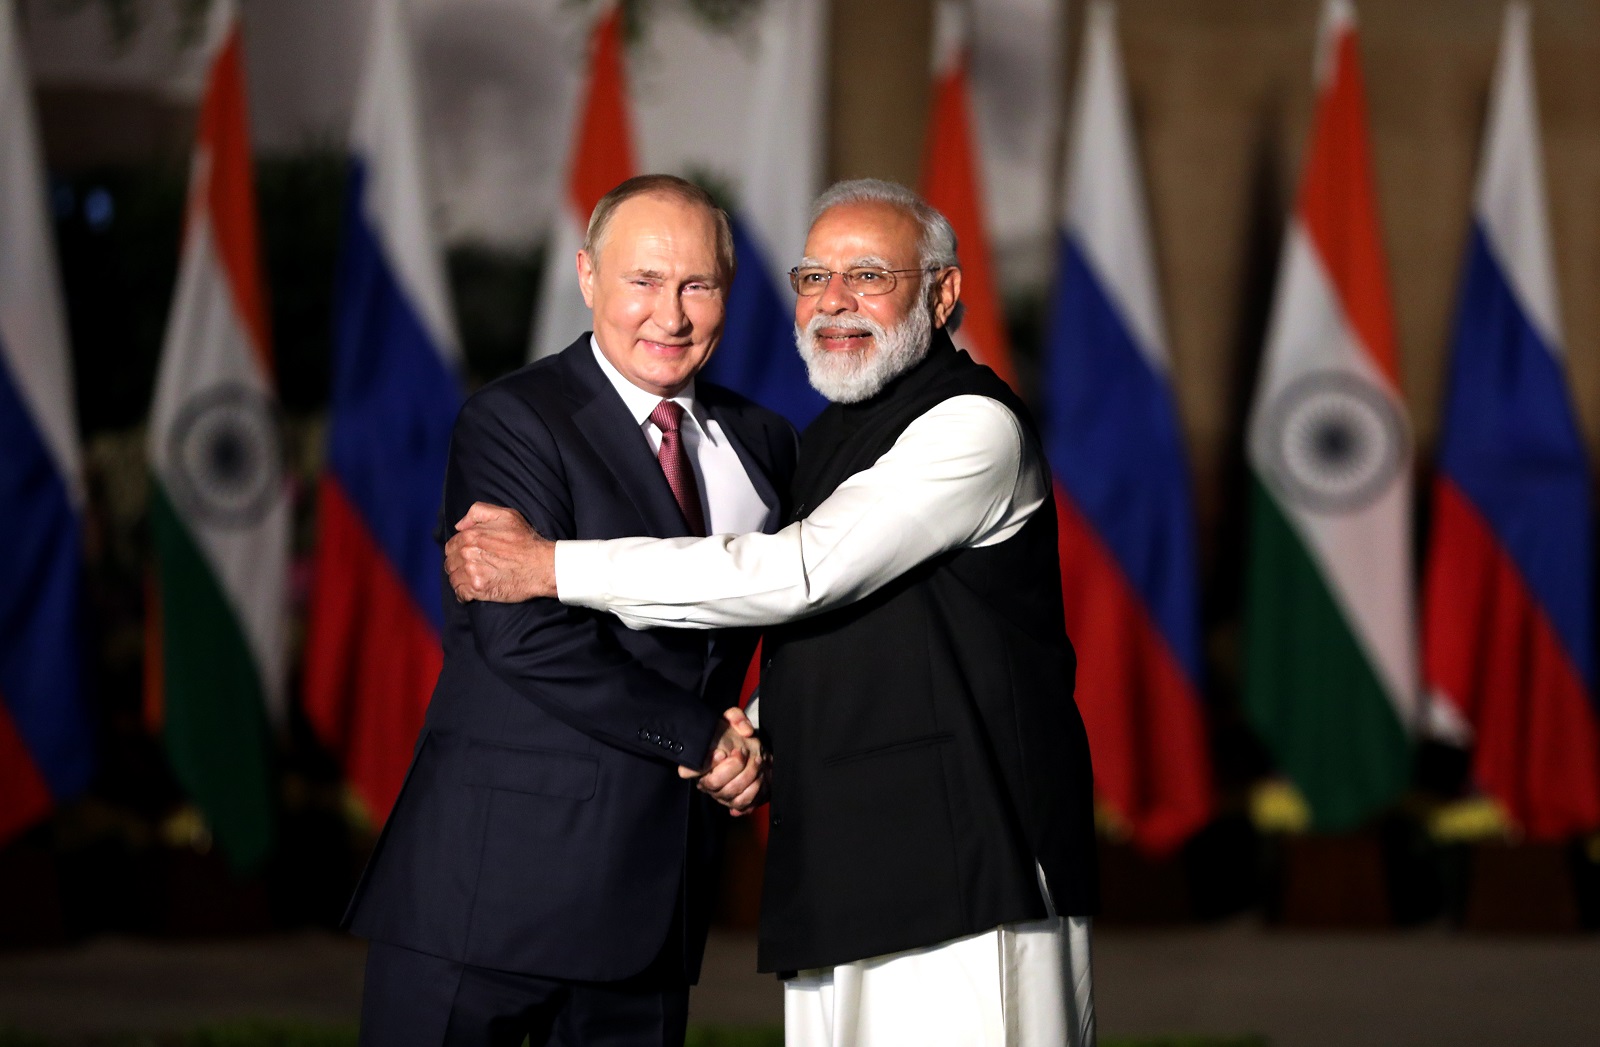 epa09625575 Indian Prime Minister Narendra Modi (R) and Russian President Vladimir Putin pose for a photo prior to a meeting in New Delhi, India 06 December 2021. Putin arrived in India to attend the 21st India-Russia annual summit 2021.  EPA/HARISH TYAGI